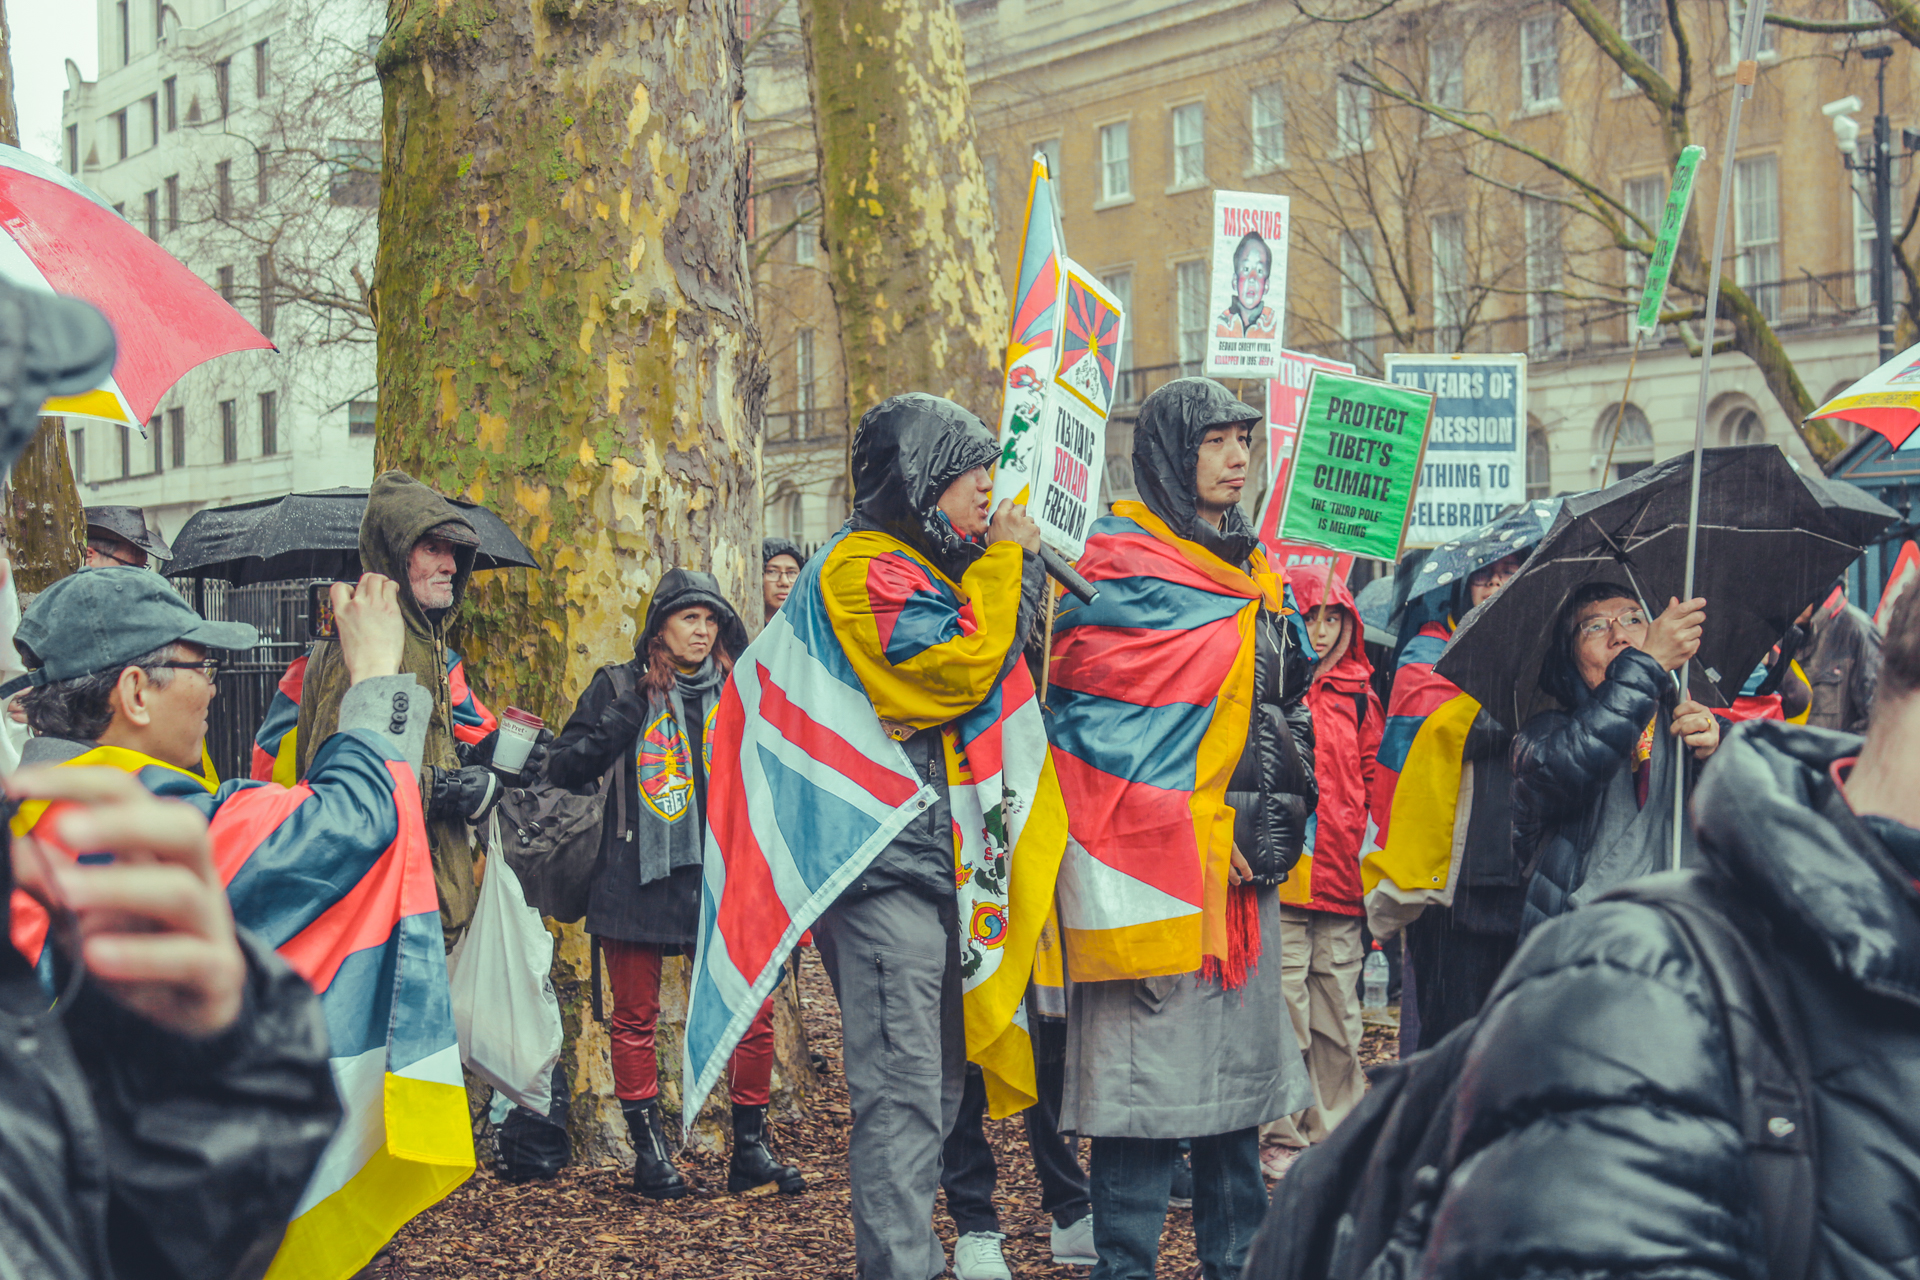 Tibetan activists, wearing both UK and Tibetan flags over their shoulders, give speeches outside 10 Downing Street.